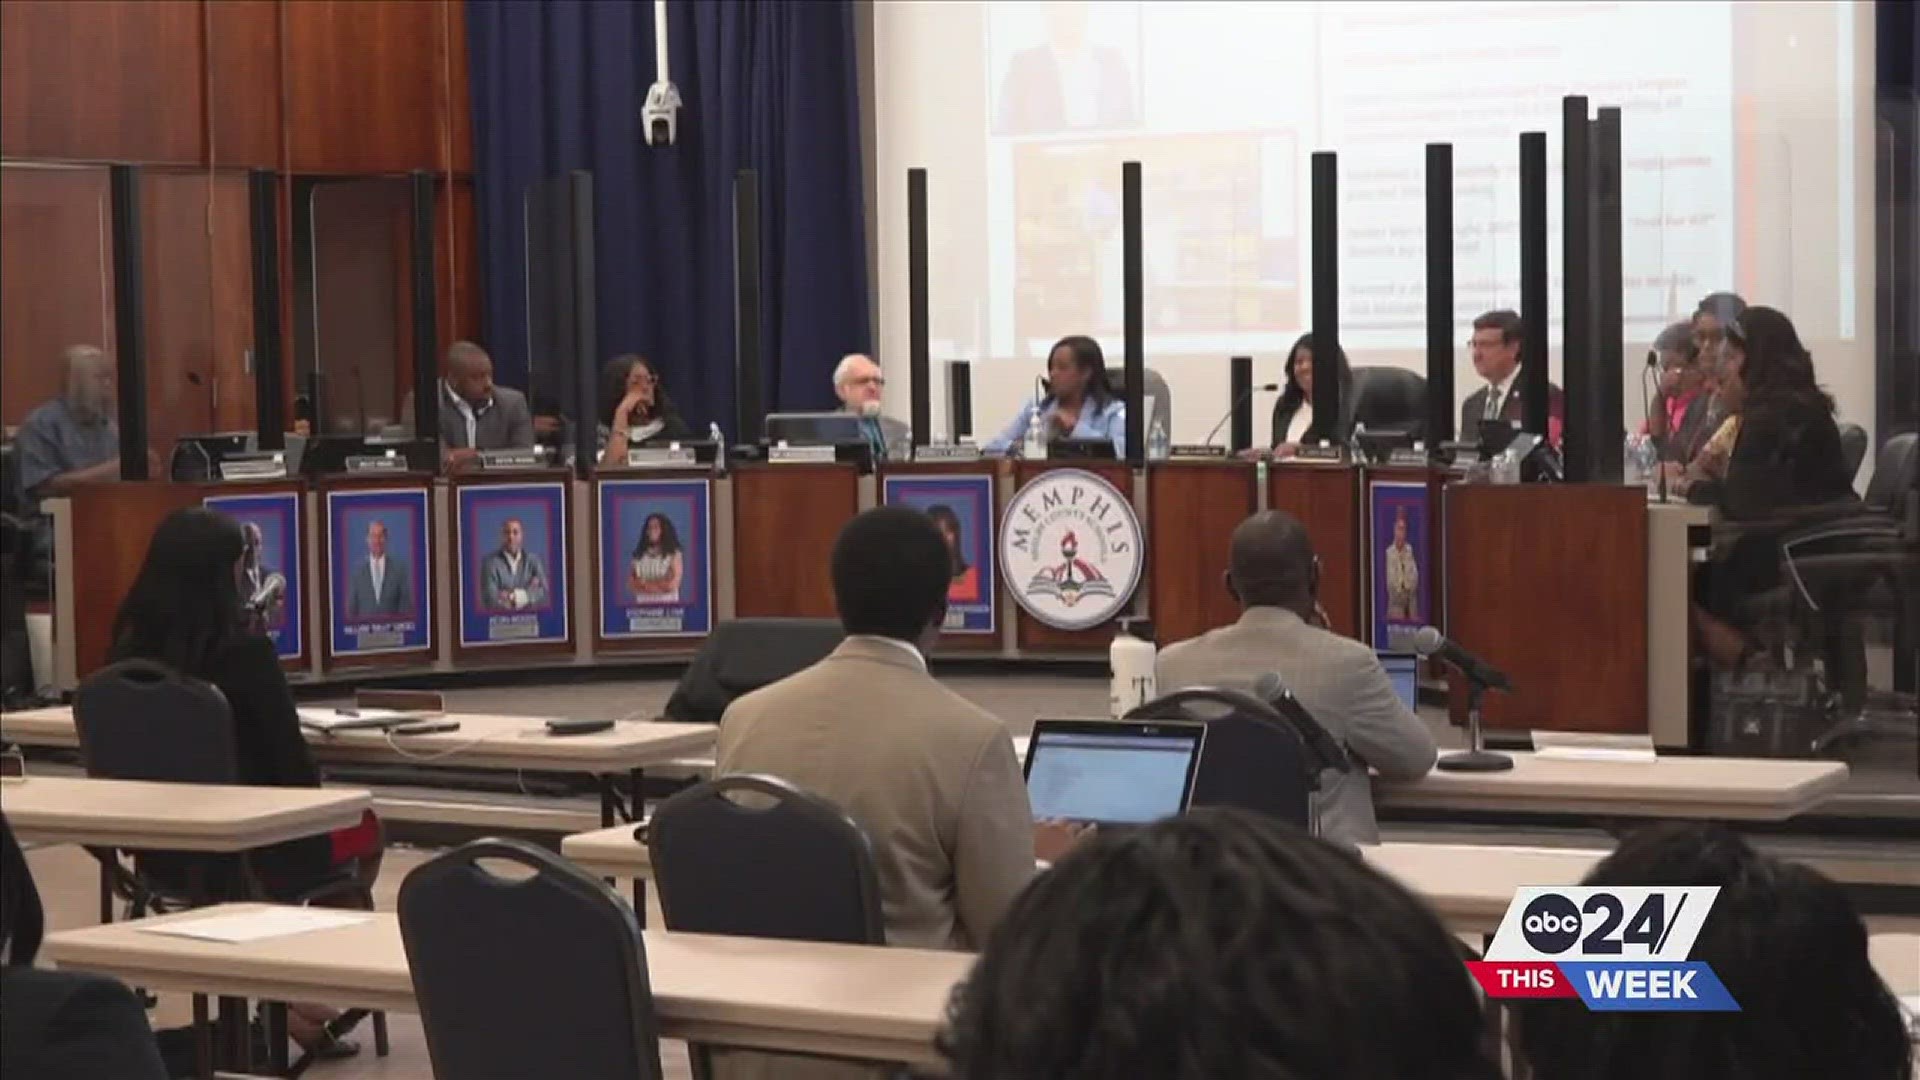 The Memphis Shelby County School board has delayed their search for a superintendent but have also announced a series of meetings to revise and expand the search.